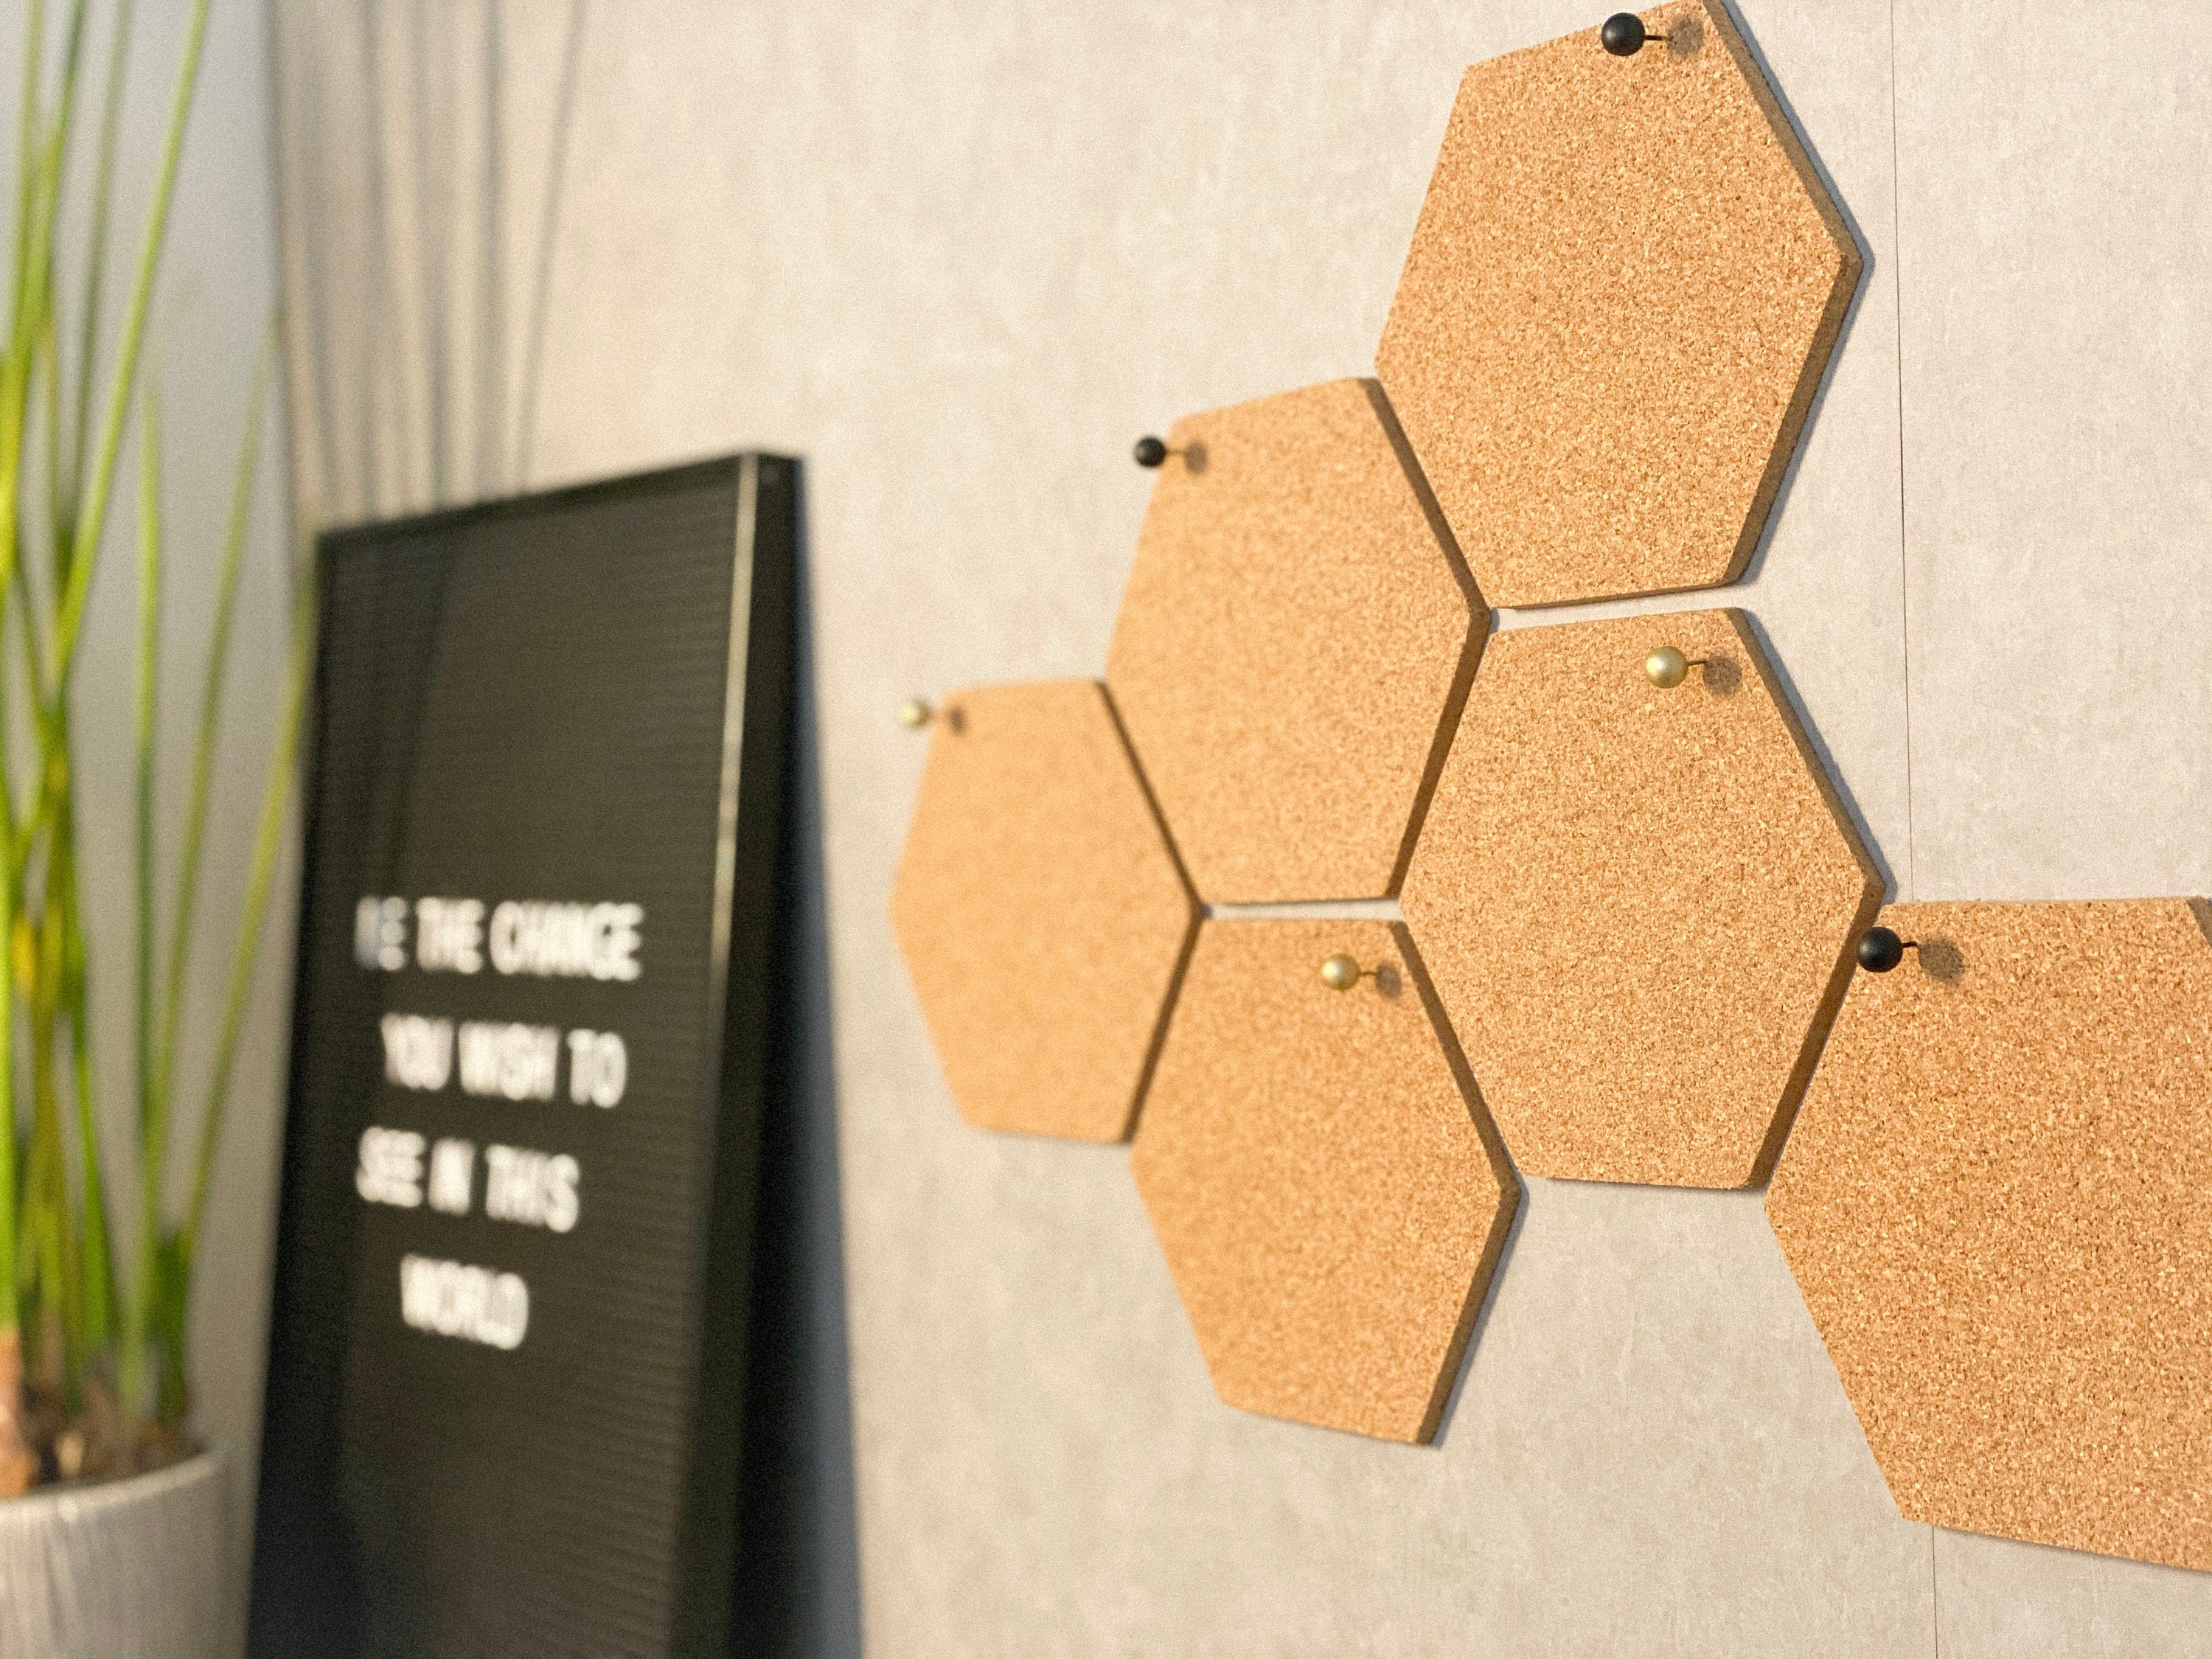 Hexagon Cork Board Tiles Self Adhesive, Pin Board Decoration, 4 Pack with  40 Push Pins 